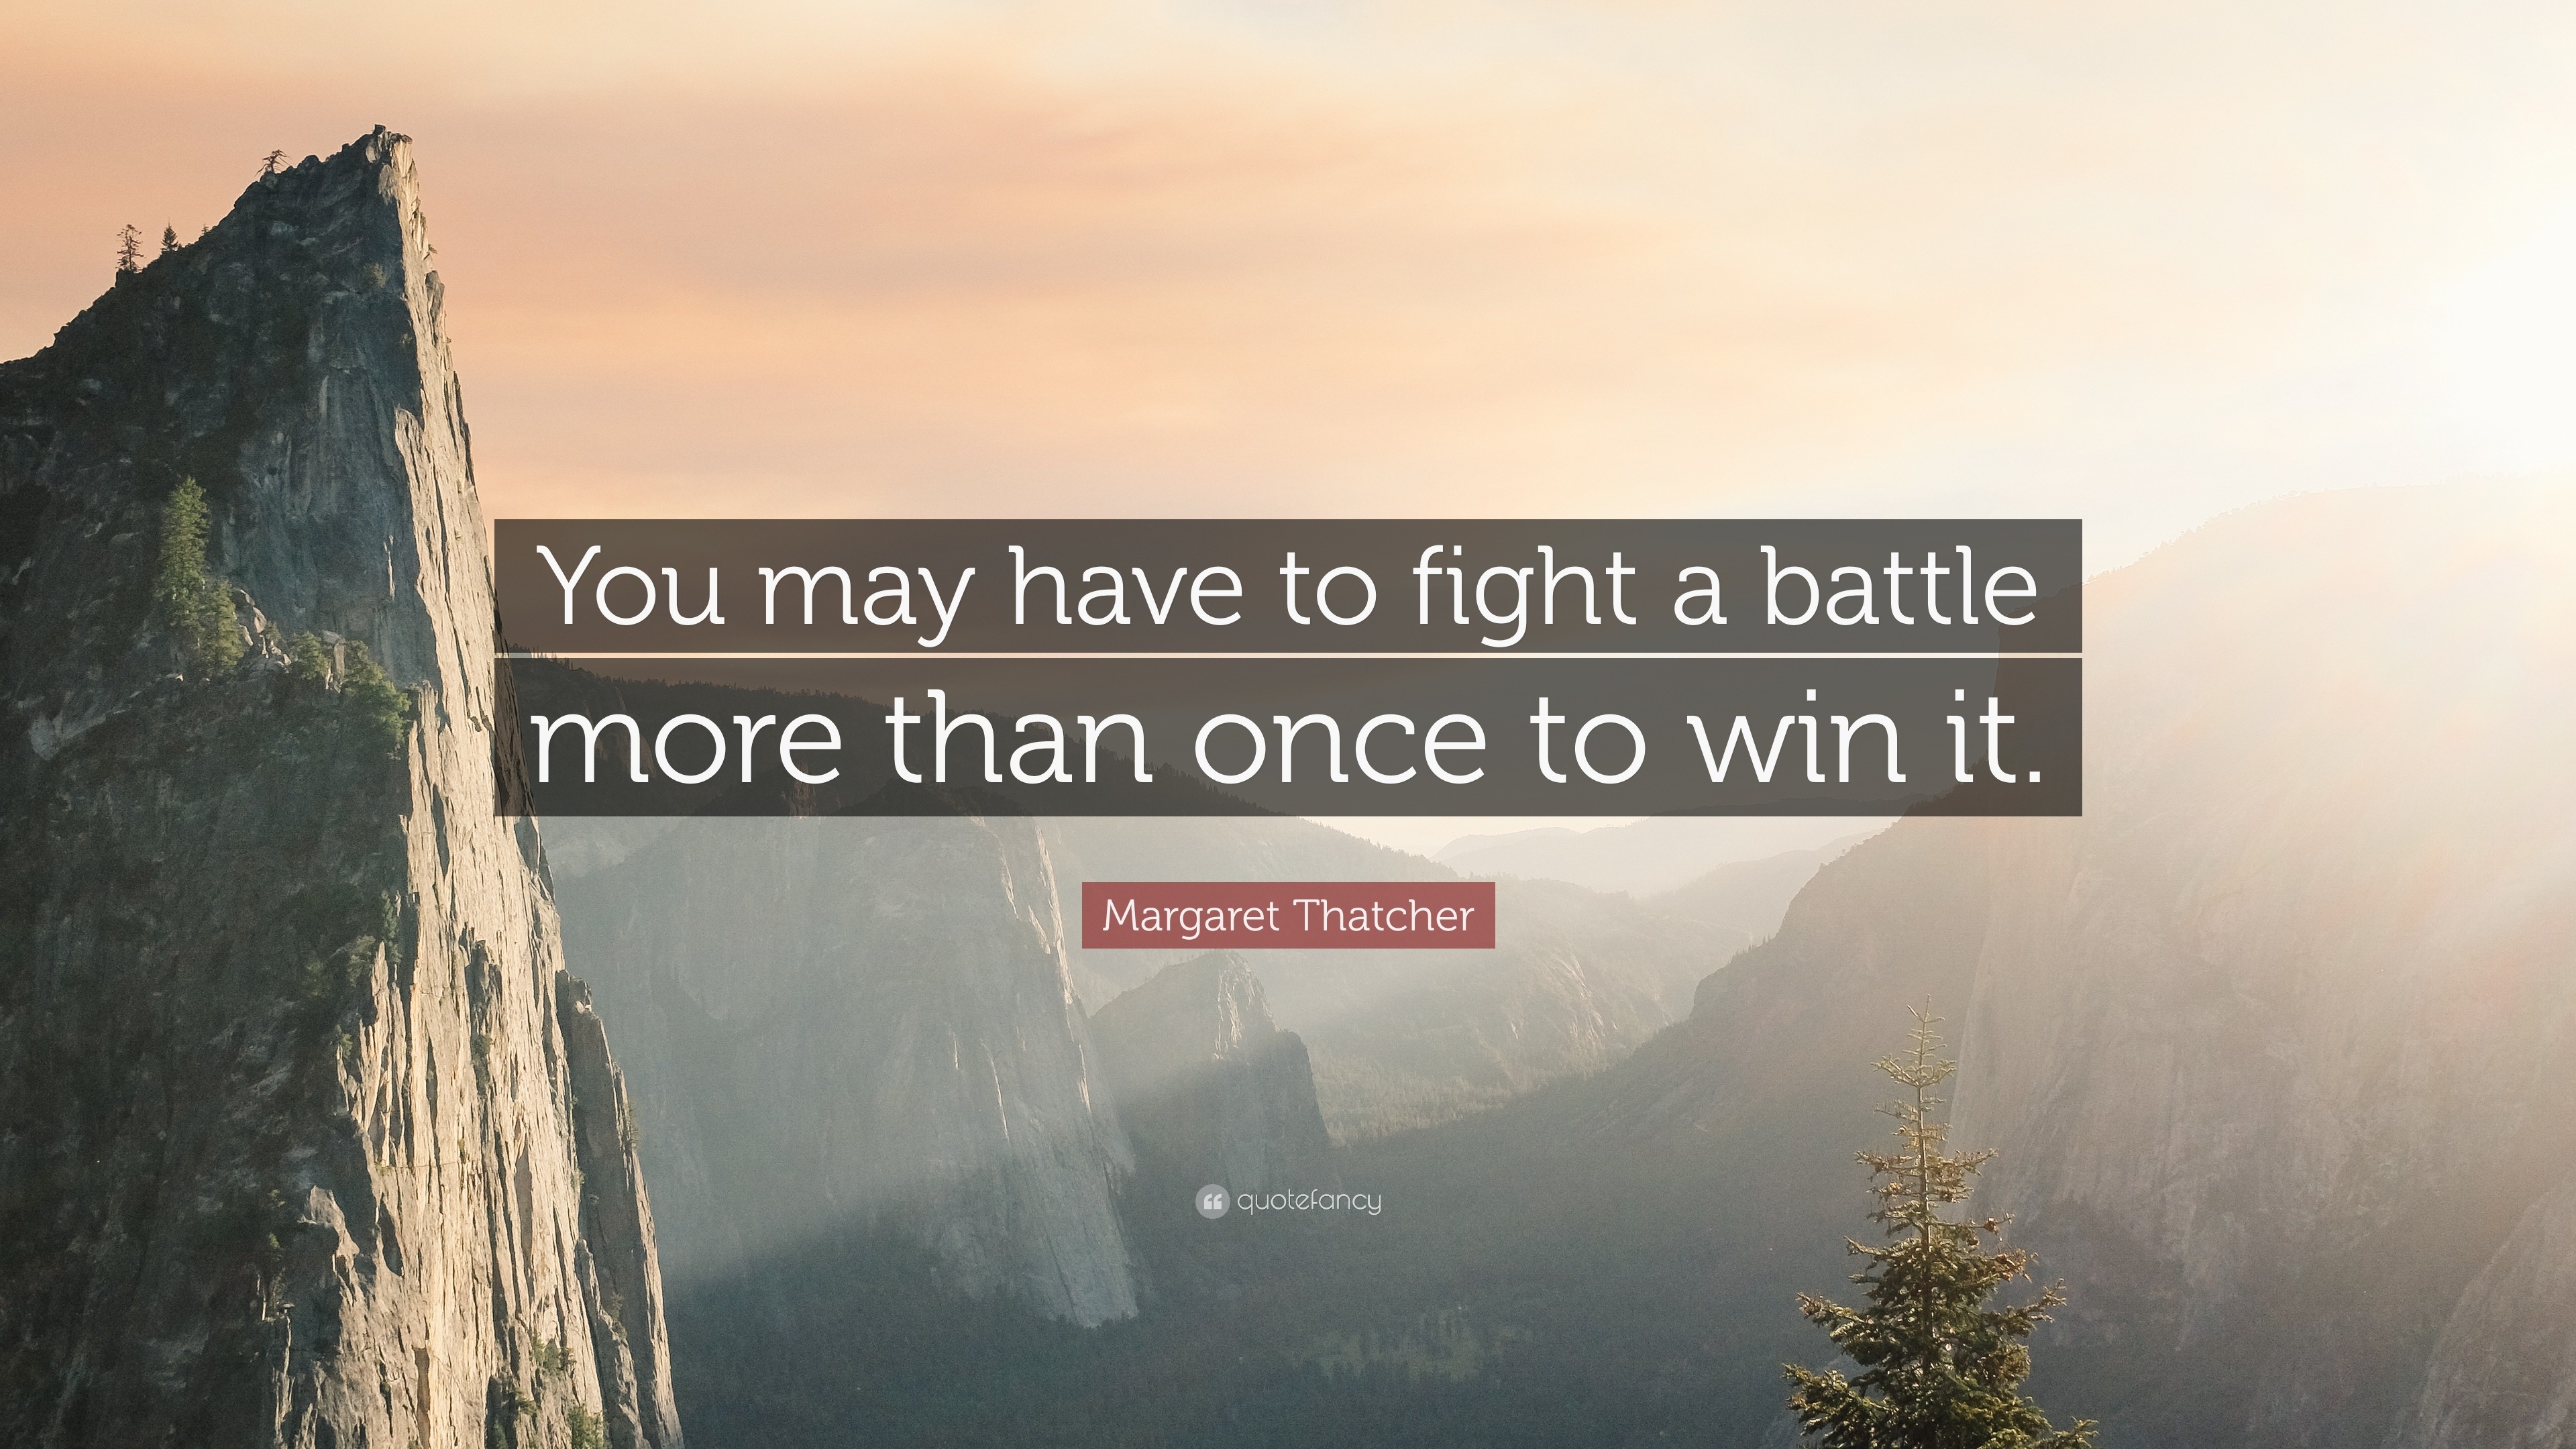 12299 Margaret Thatcher Quote You may have to fight a battle more than